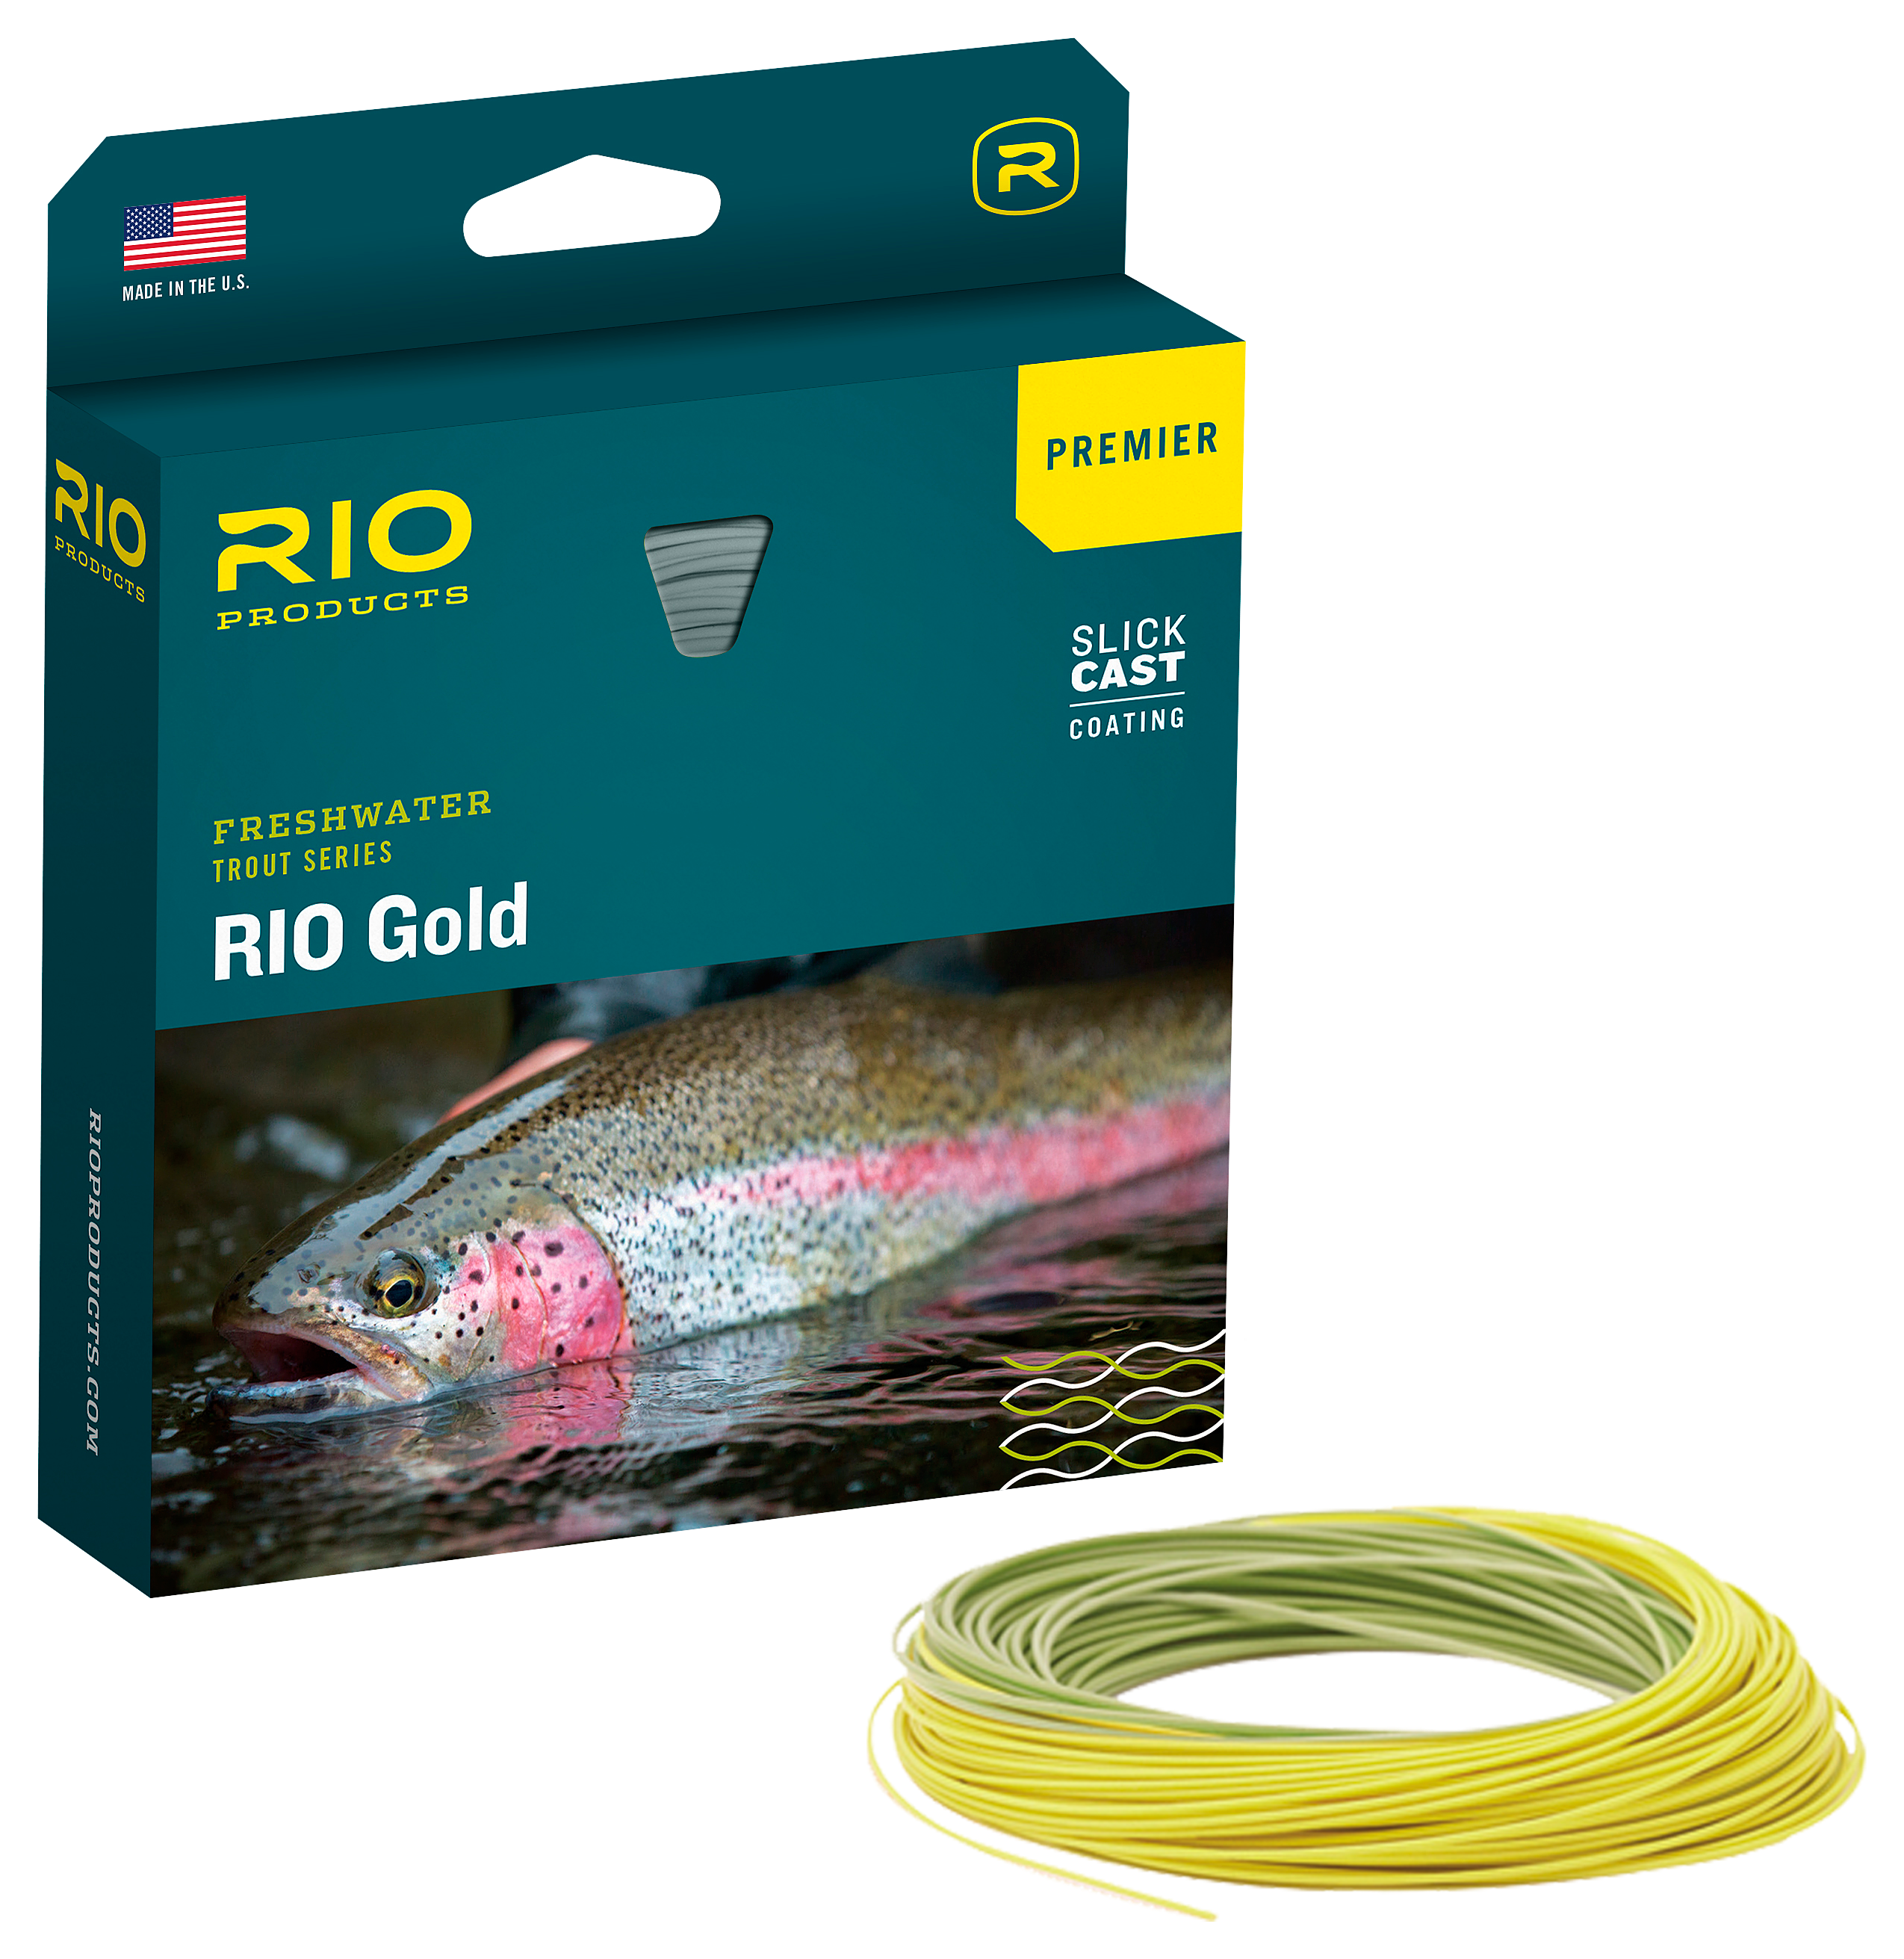 RIO Premier RIO Gold Fly Line - Moss/Gold - 90' - 5 Wt.